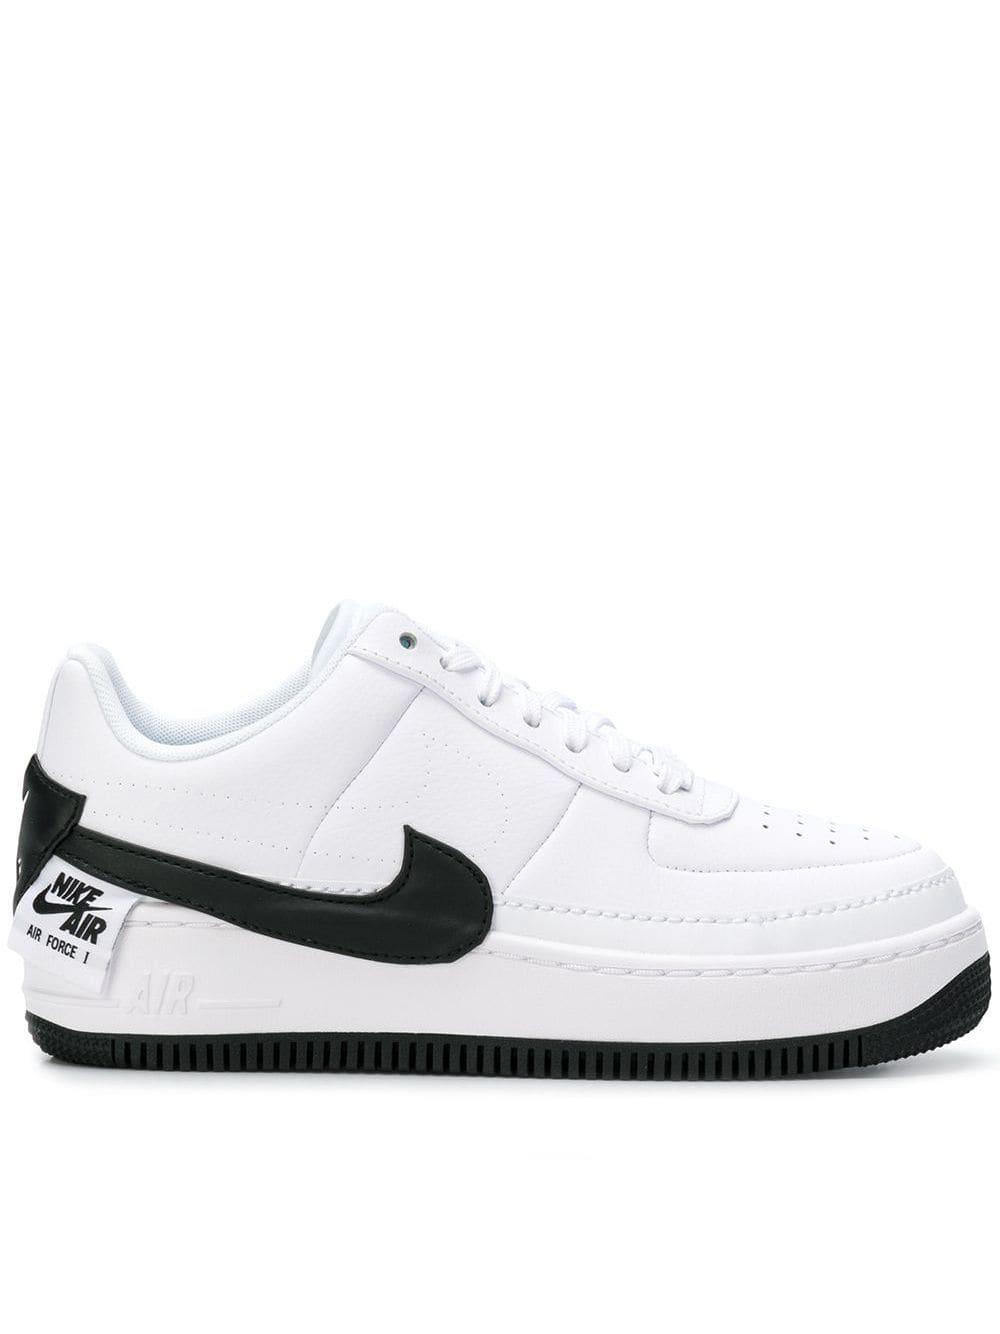 air force 1 jester canada